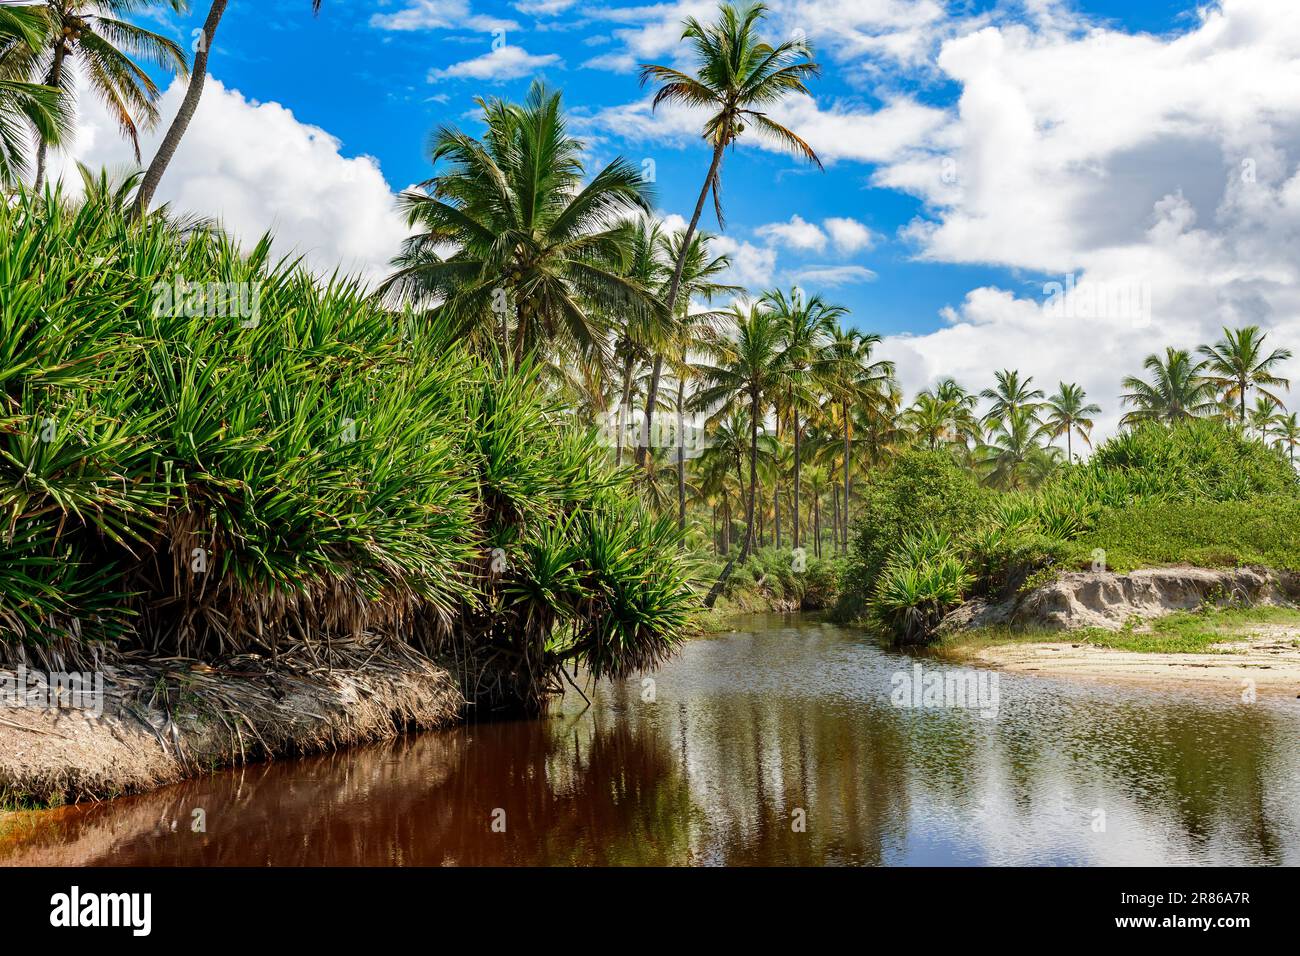 Dark water river passing through native vegetation, beach sand and coconut trees on the way to the sea Stock Photo